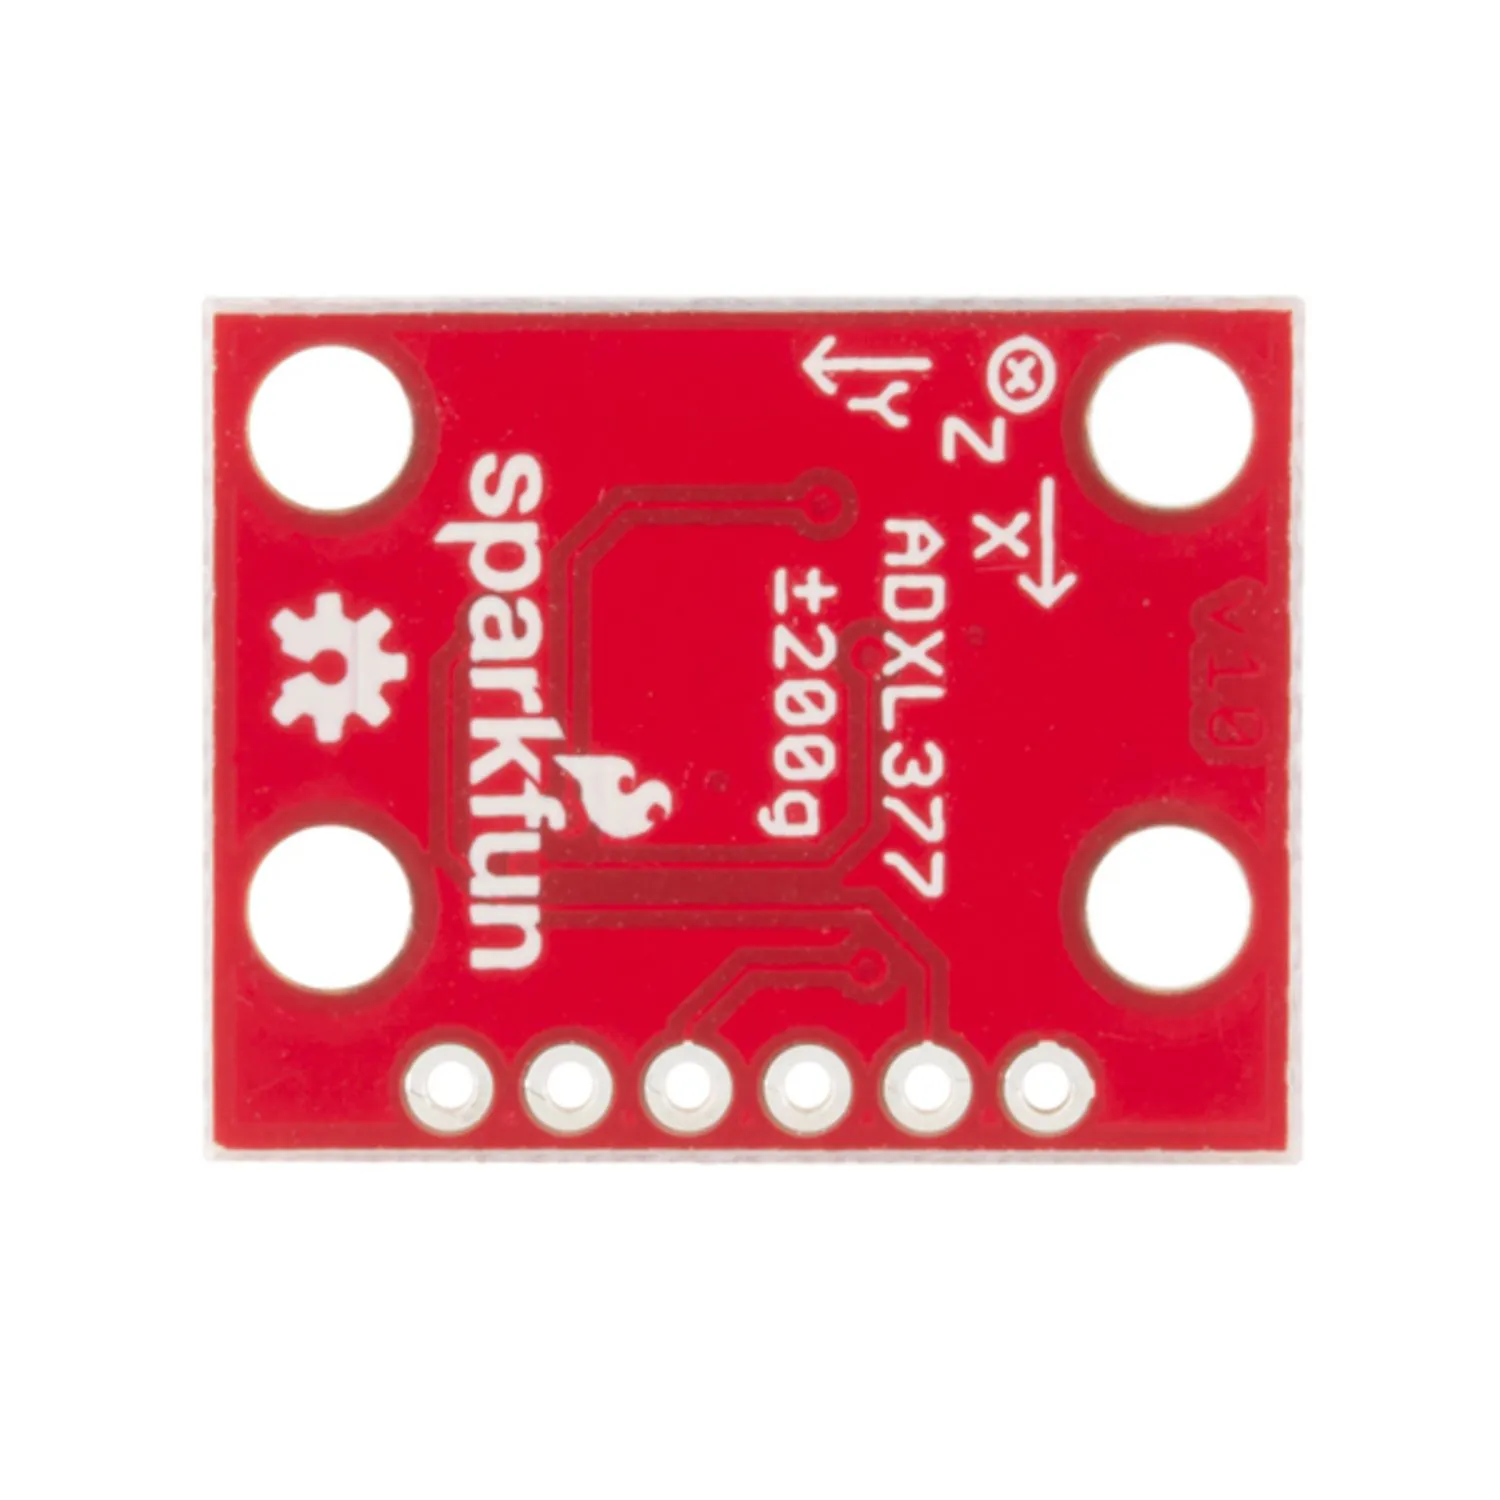 Photo of SparkFun Triple Axis Accelerometer Breakout - ADXL377